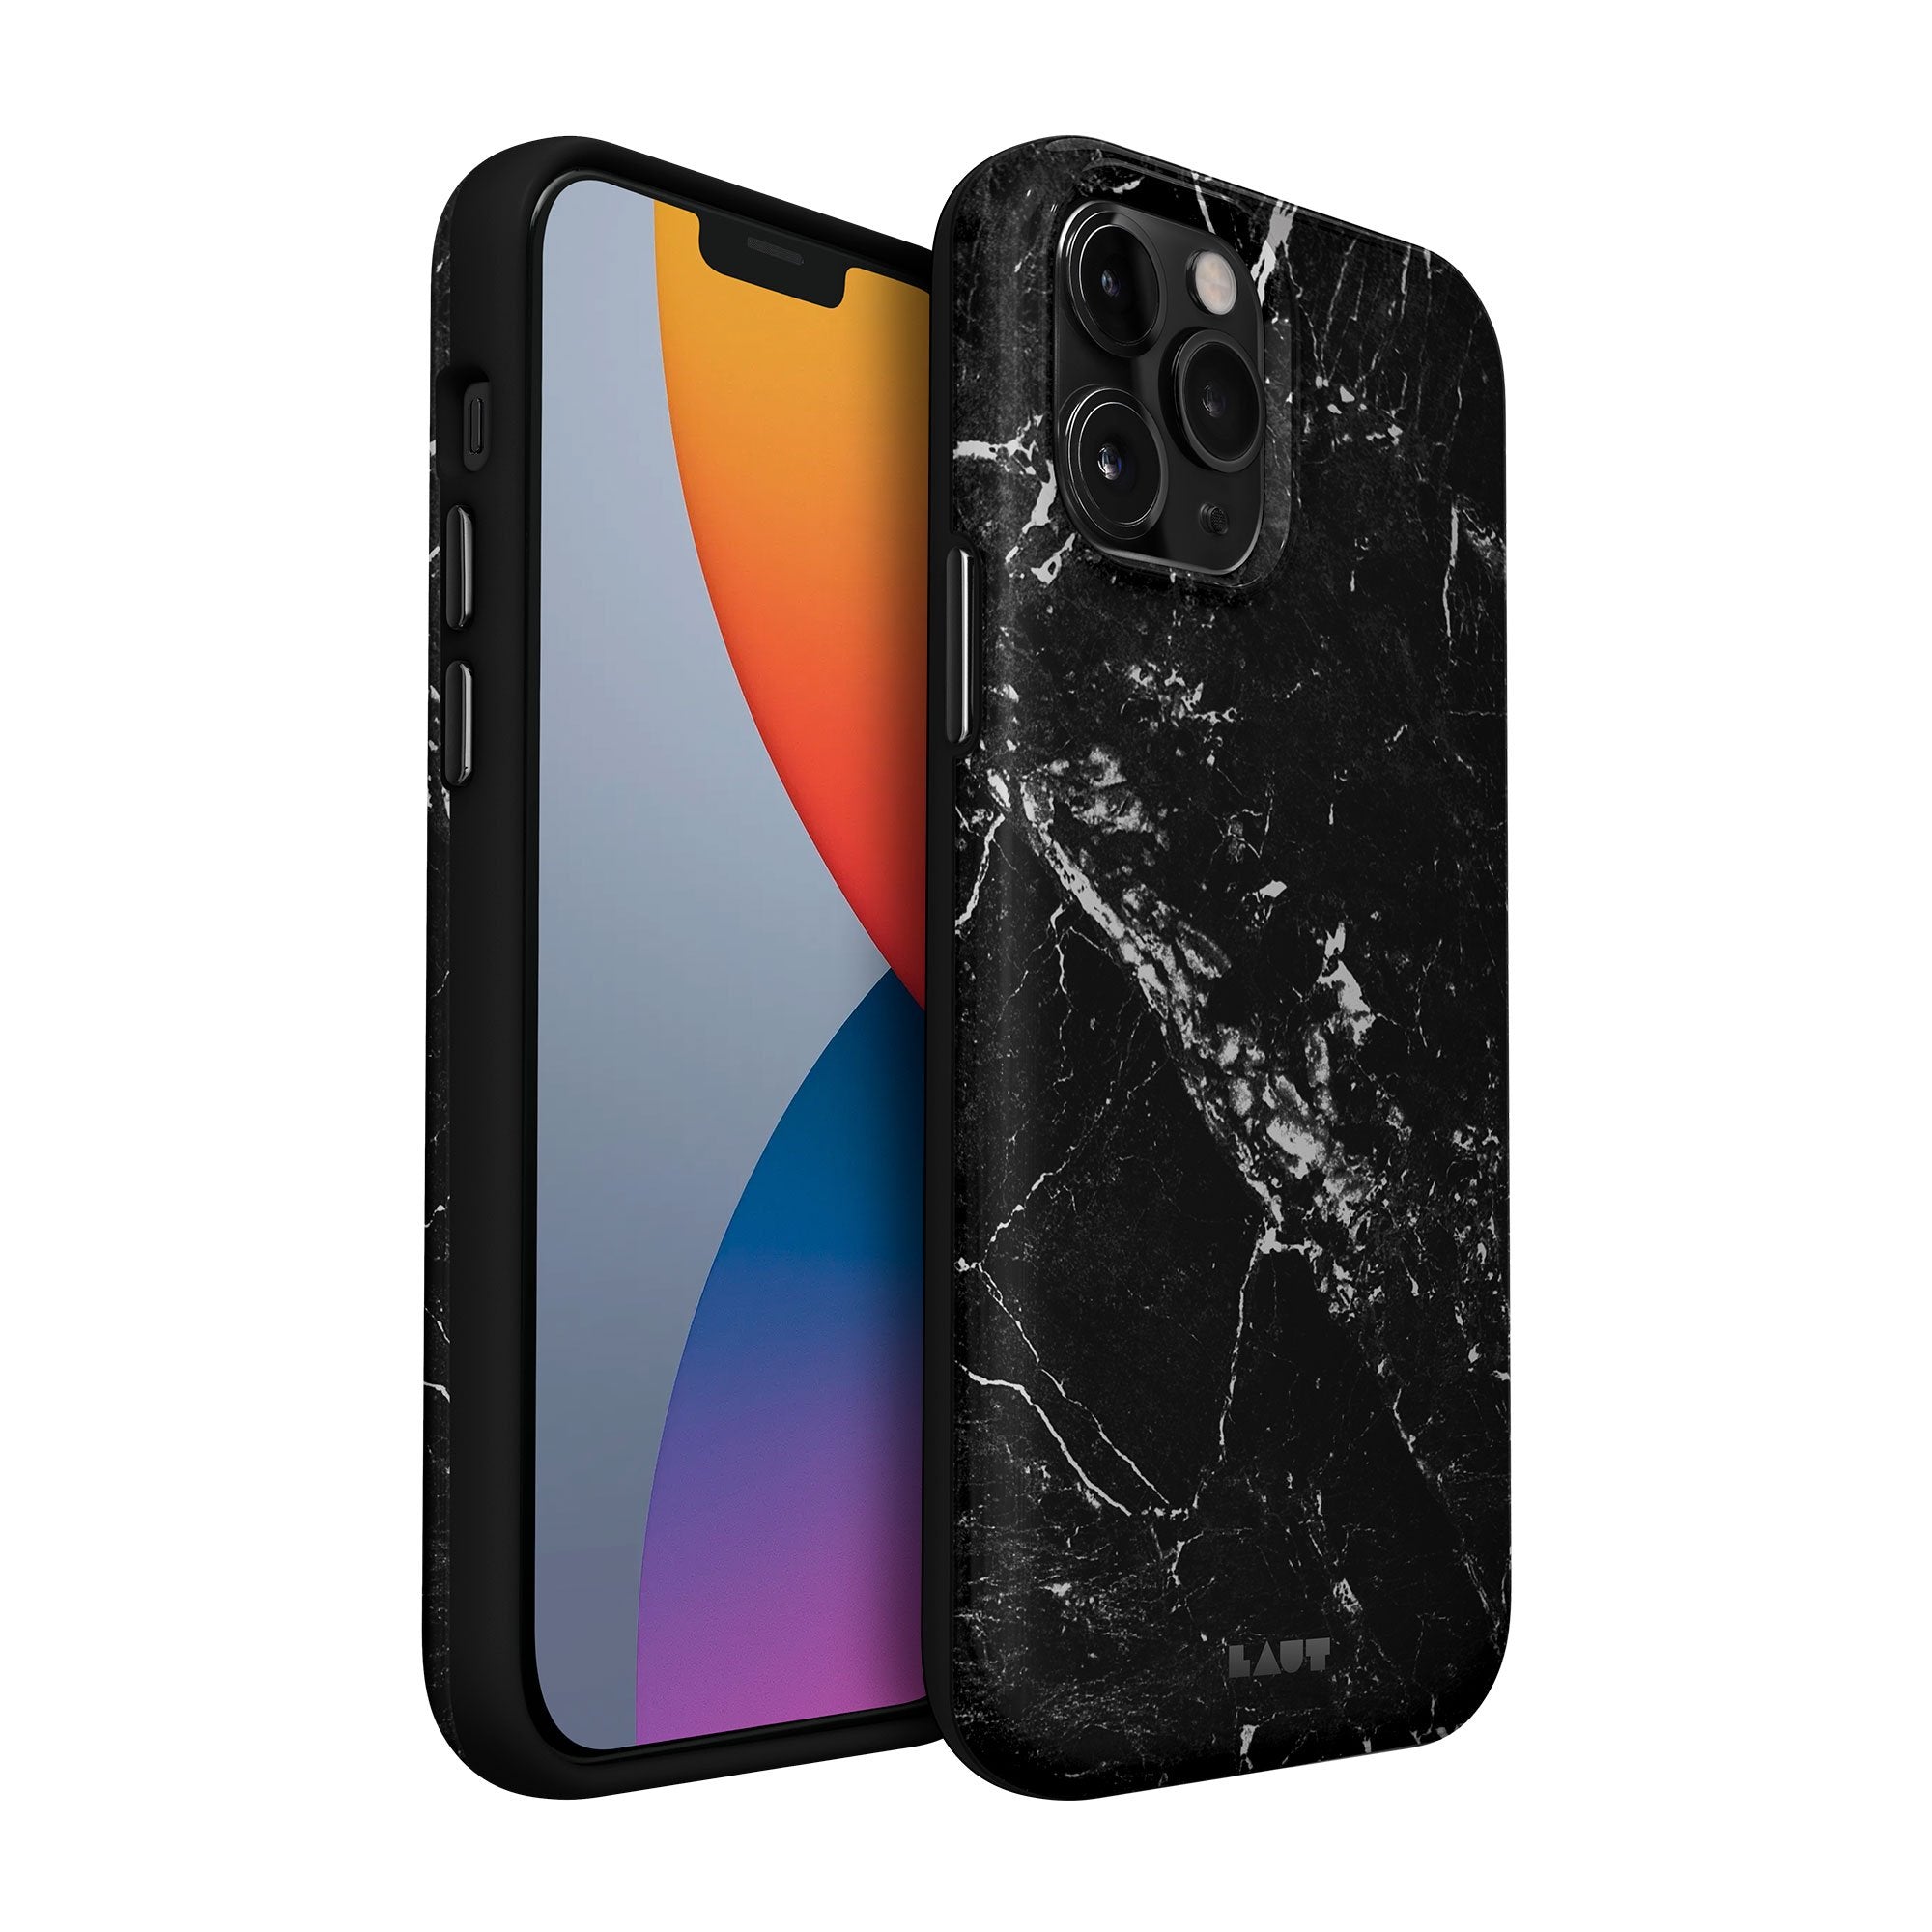 HUEX ELEMENTS case for iPhone 12 series